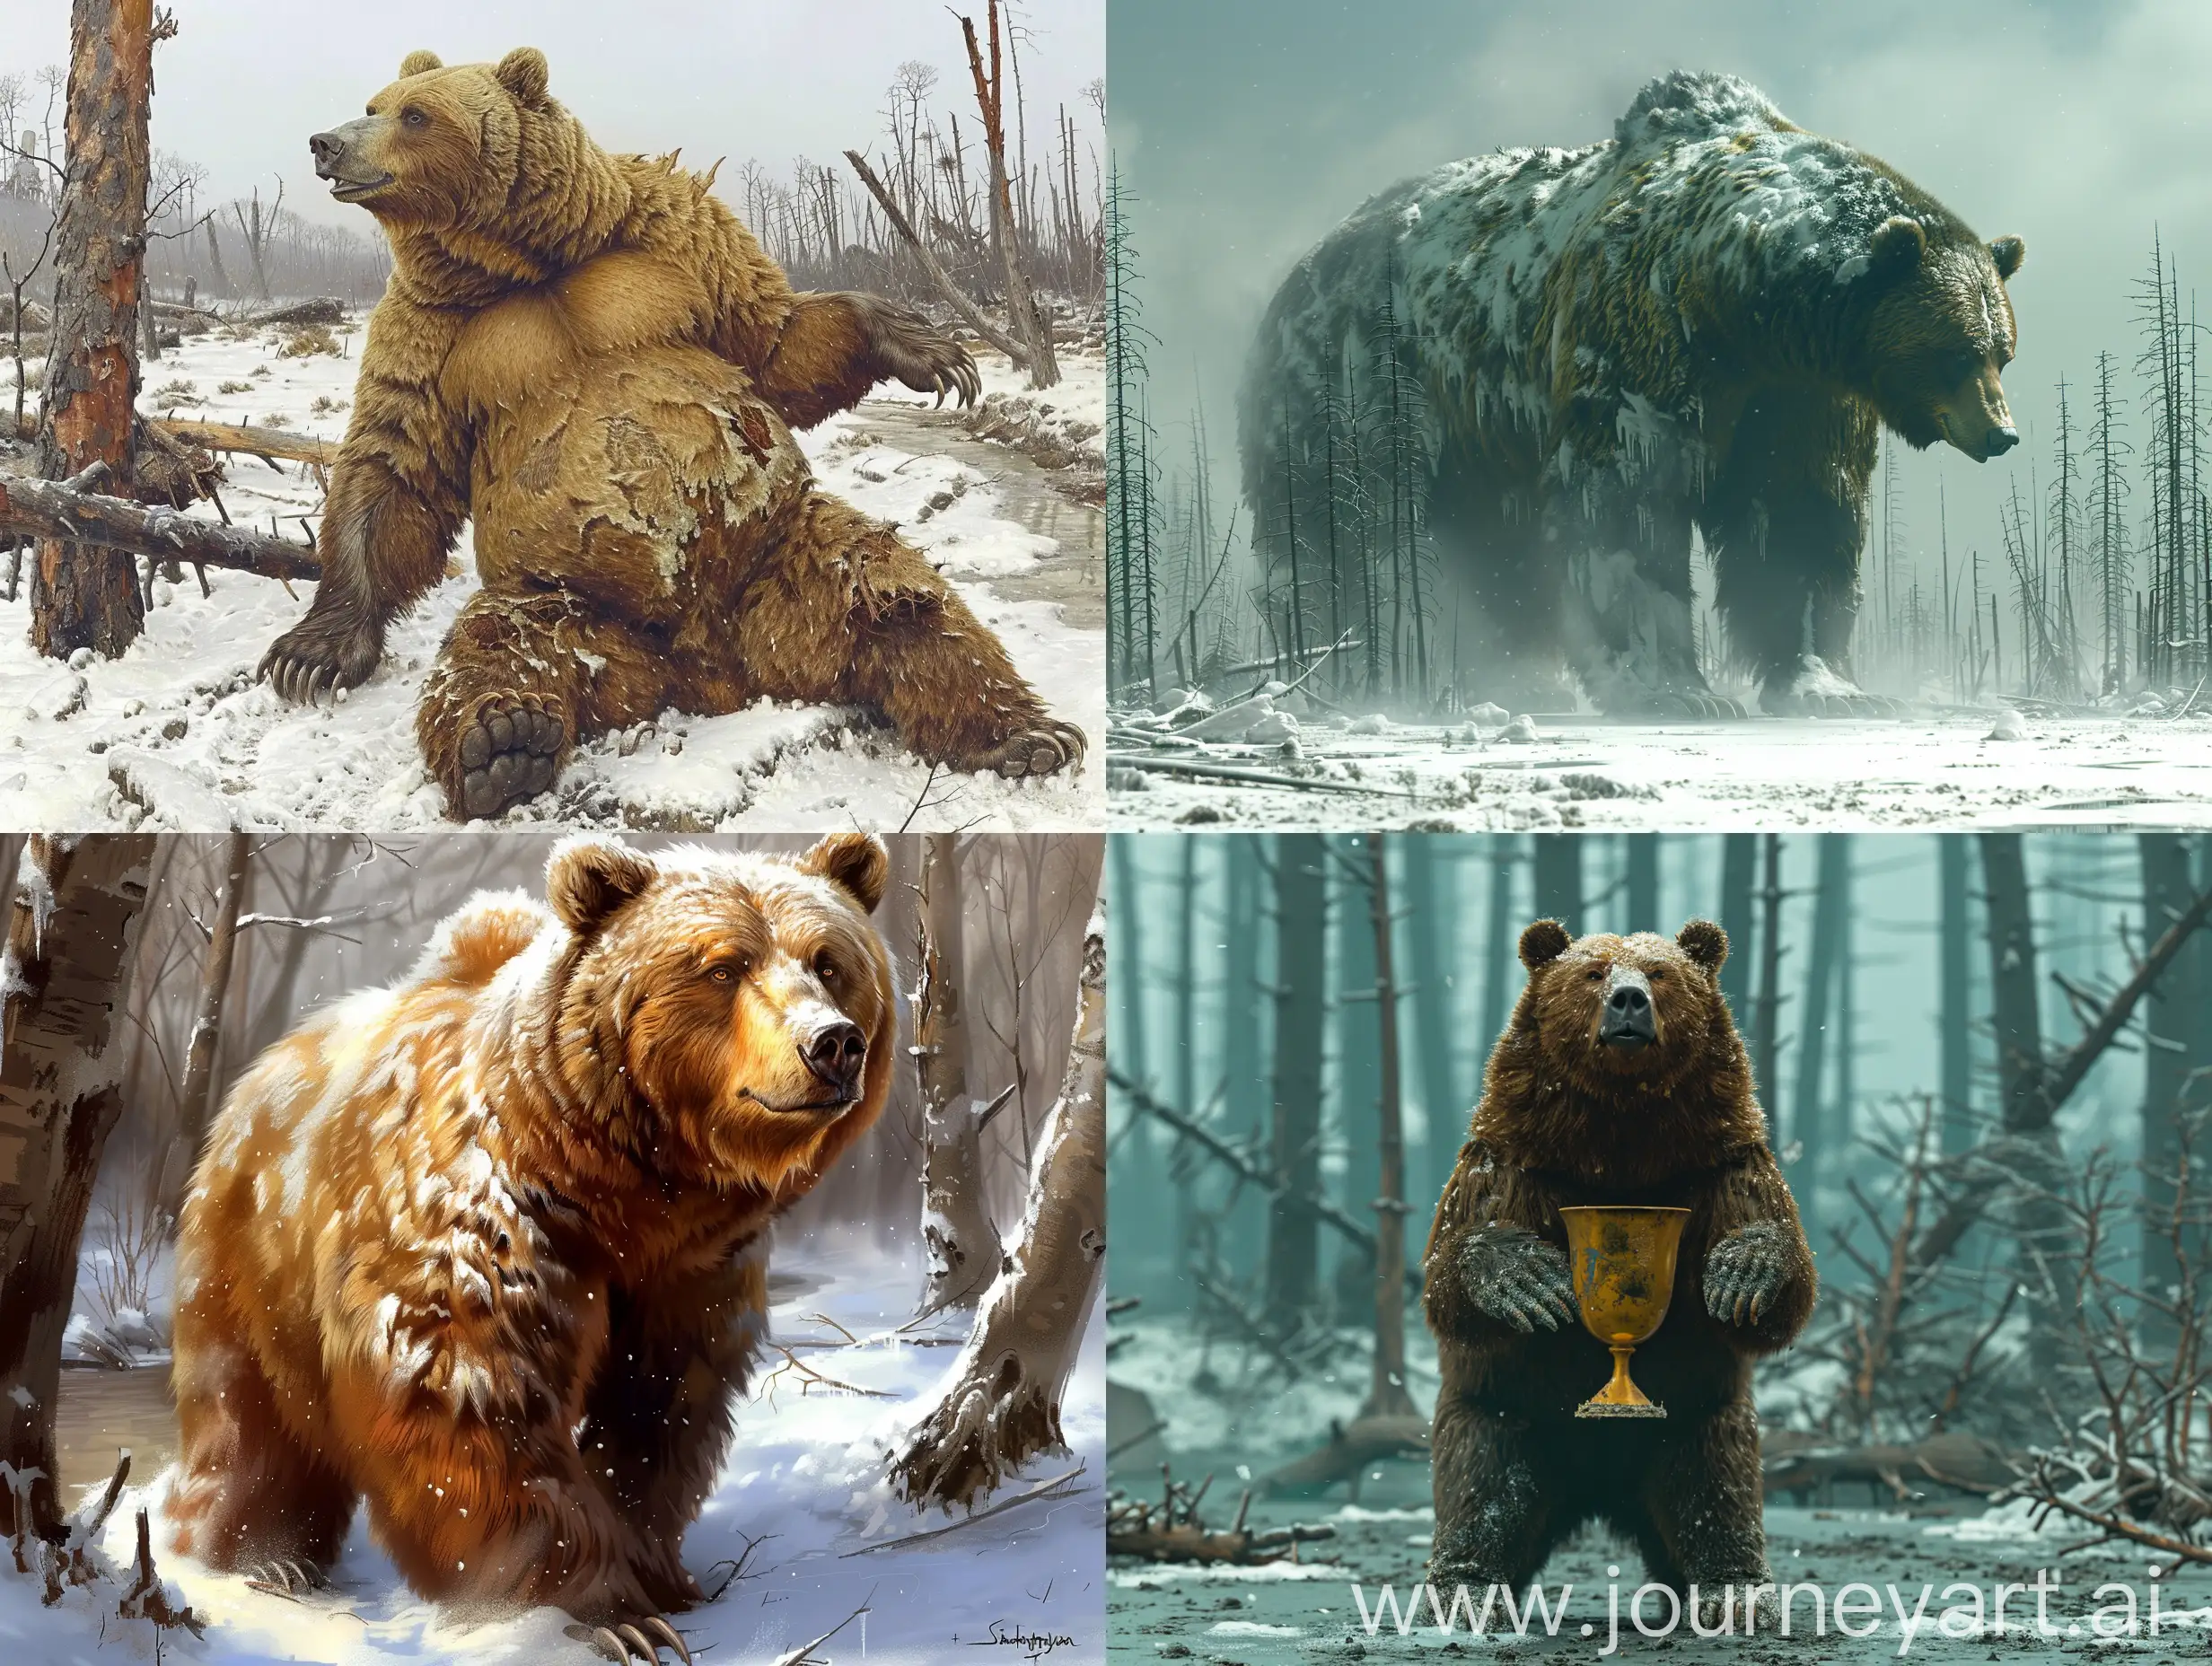 In a desolate, post-apocalyptic landscape, a massive grizzly bear emerges from its long hibernation, its fur thick and frost-covered. The bear, with a mix of curiosity and wariness in its eyes, stands on its hind legs amidst the remnants of a once-thriving forest now covered in a layer of snow and ash. The bear's awakening is juxtaposed against a backdrop of skeletal trees, their bare branches coated in a layer of frost, and remnants of human civilization partially buried in the snow.
The environment is a hauntingly beautiful yet desolate winter landscape, featuring skeletal trees, frozen rivers, and abandoned buildings. The sky is overcast, casting a muted light over the bleak scene, and remnants of nuclear fallout are visible in the snow, creating an unsettling atmosphere. Style: The image is depicted in a realistic and detailed style, capturing the raw emotion and vulnerability of nature in the aftermath of a catastrophic event. The color palette is dominated by cold and muted tones, with icy blues, ashy grays, and hints of faded greens, emphasizing the harshness of the nuclear winter. The atmosphere is somber and reflective, conveying a sense of both resilience and sorrow as nature reclaims the remnants of a world forever changed.
‐‐q . 25 --stylize 1000 --c 80
